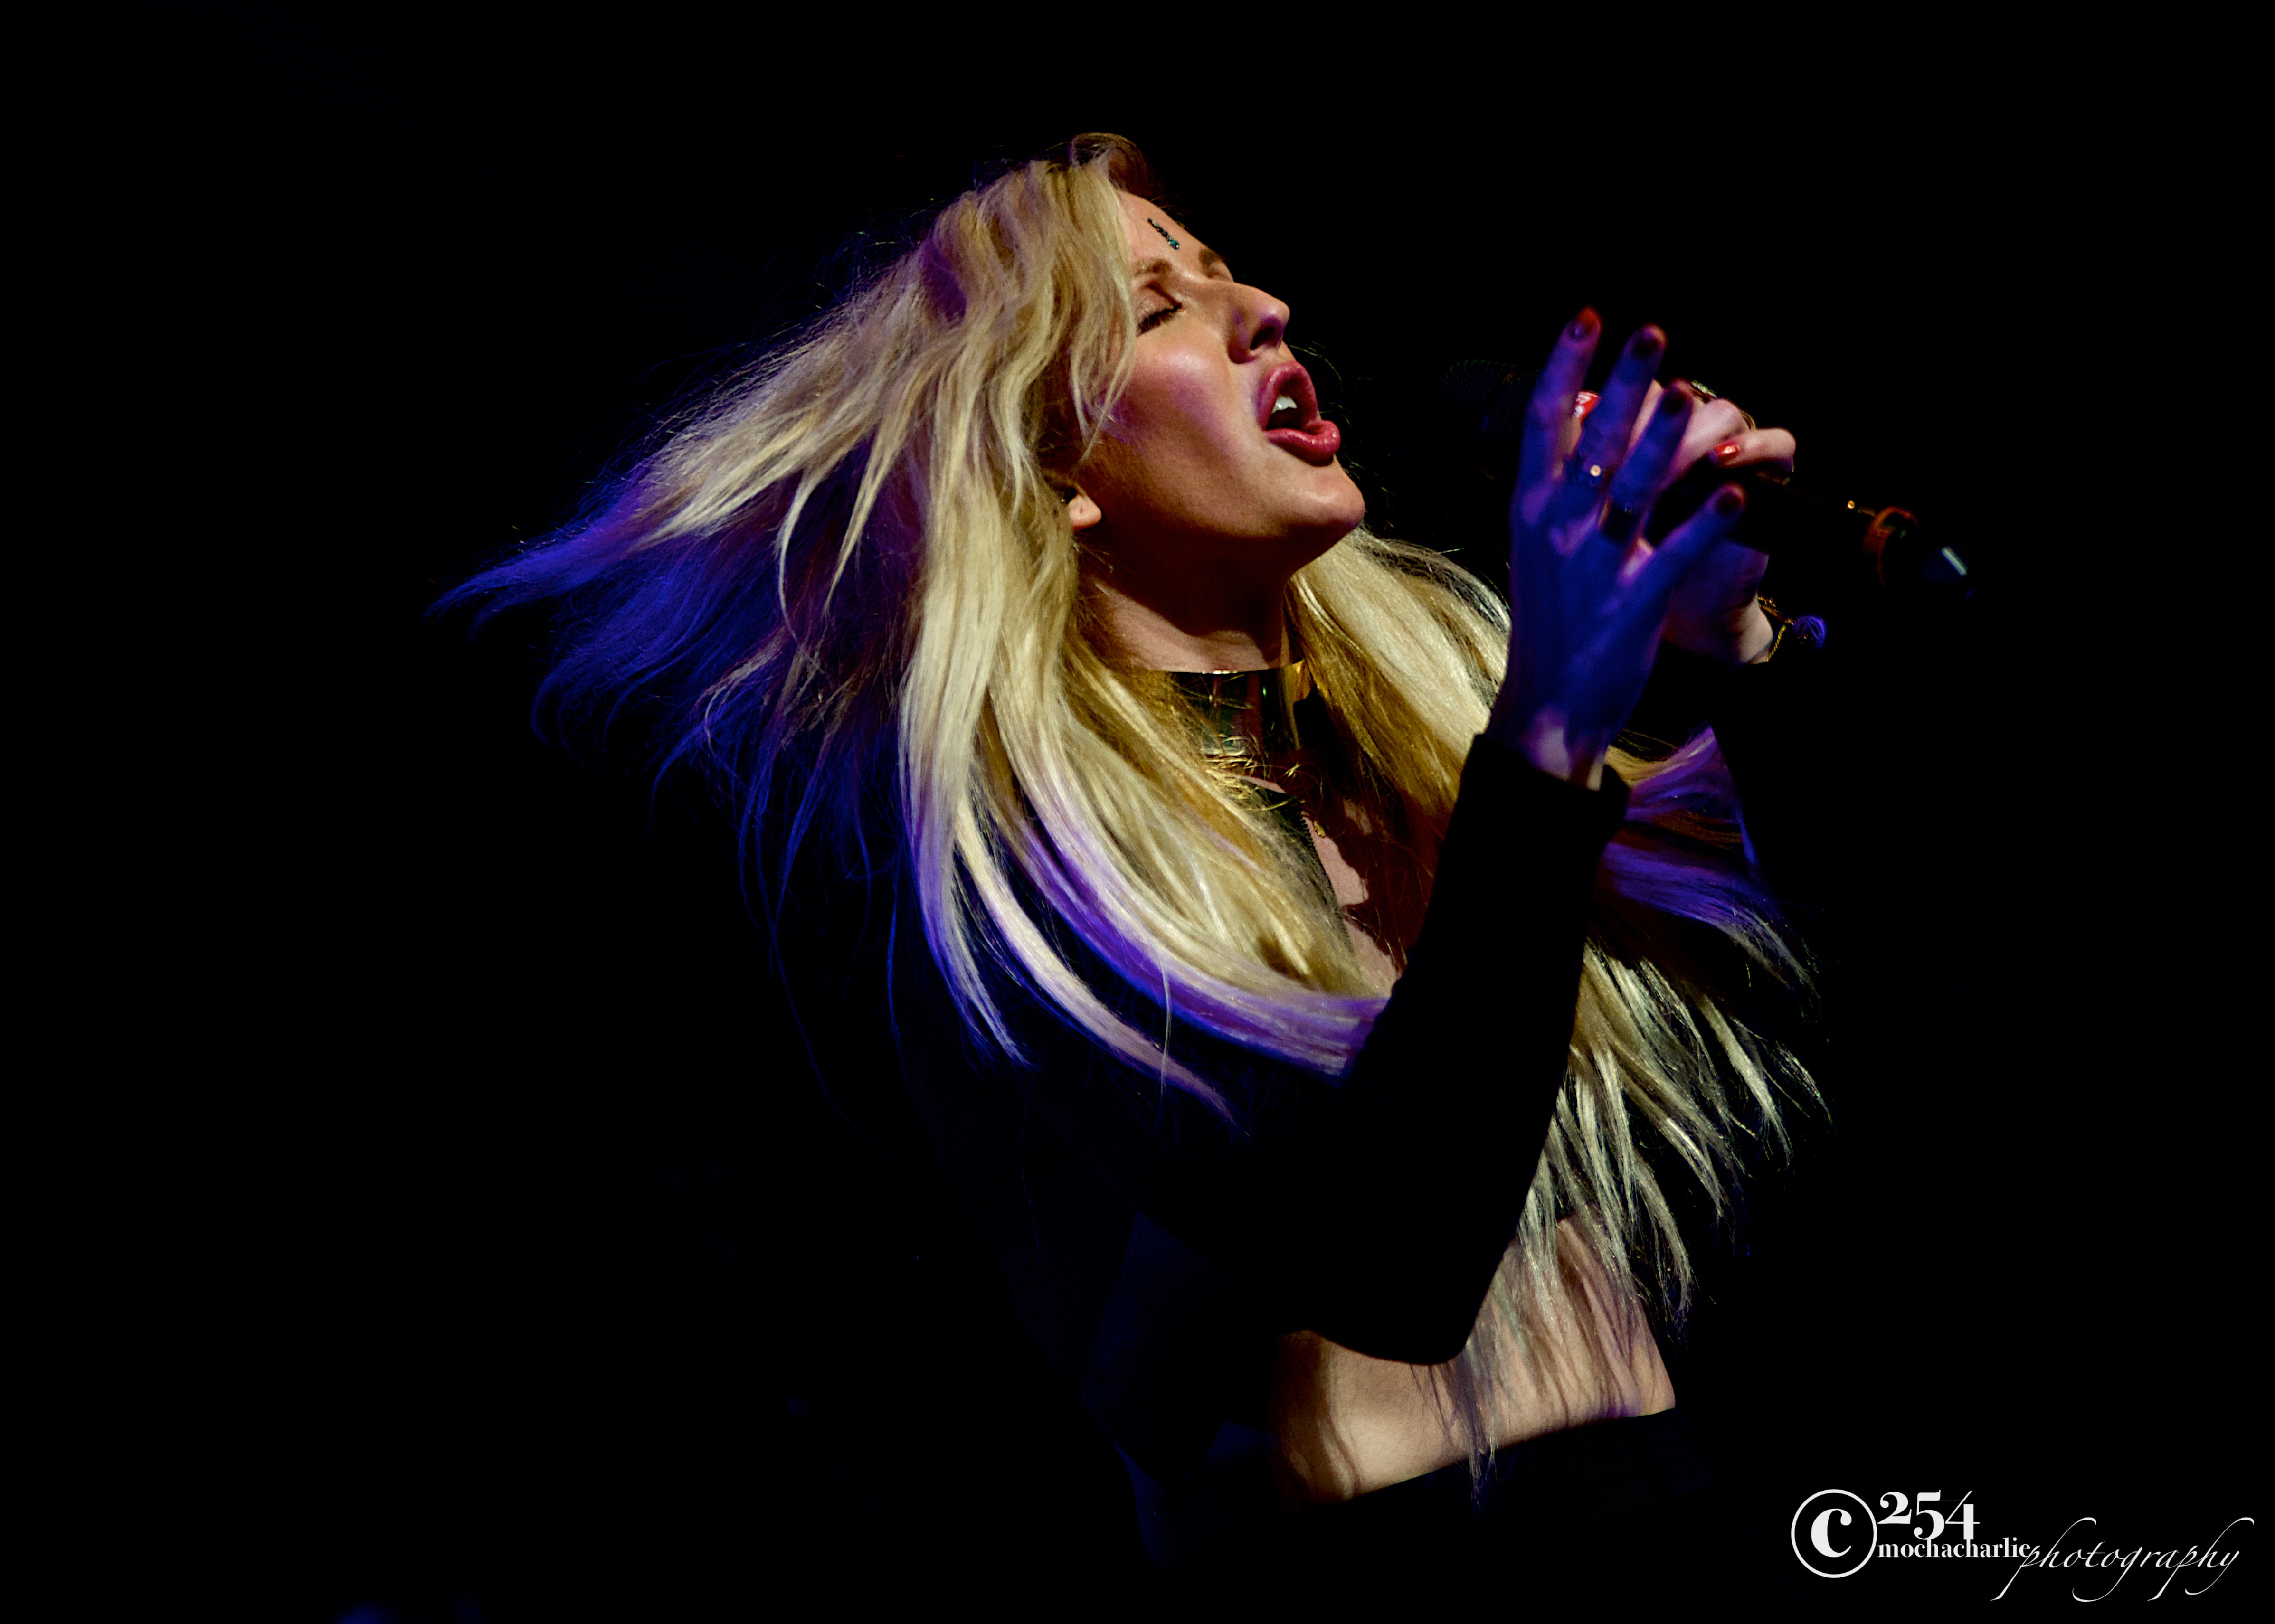 Ellie Goulding Live at Paramount (Photo by Mocha Charlie)